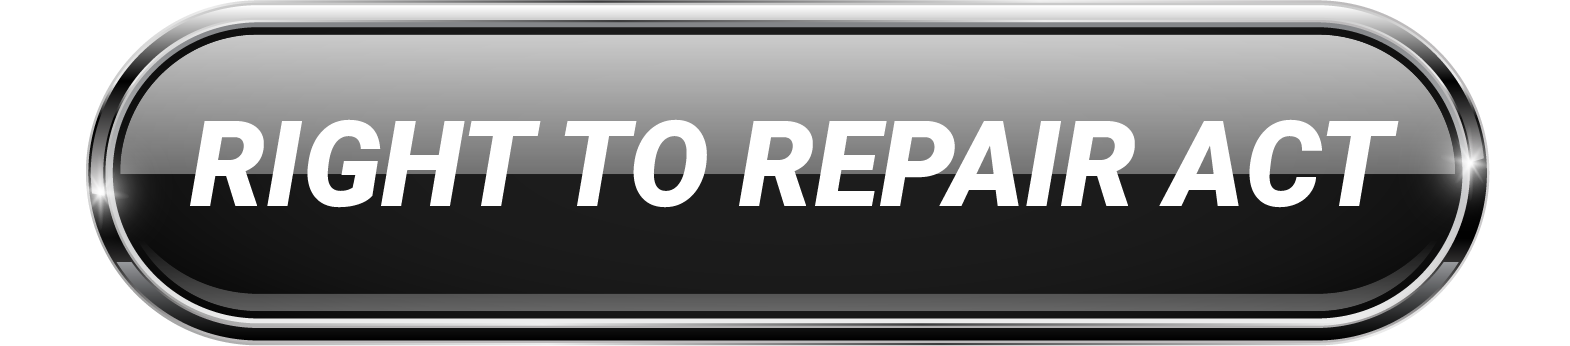 RIGHT TO REPAIR ACT